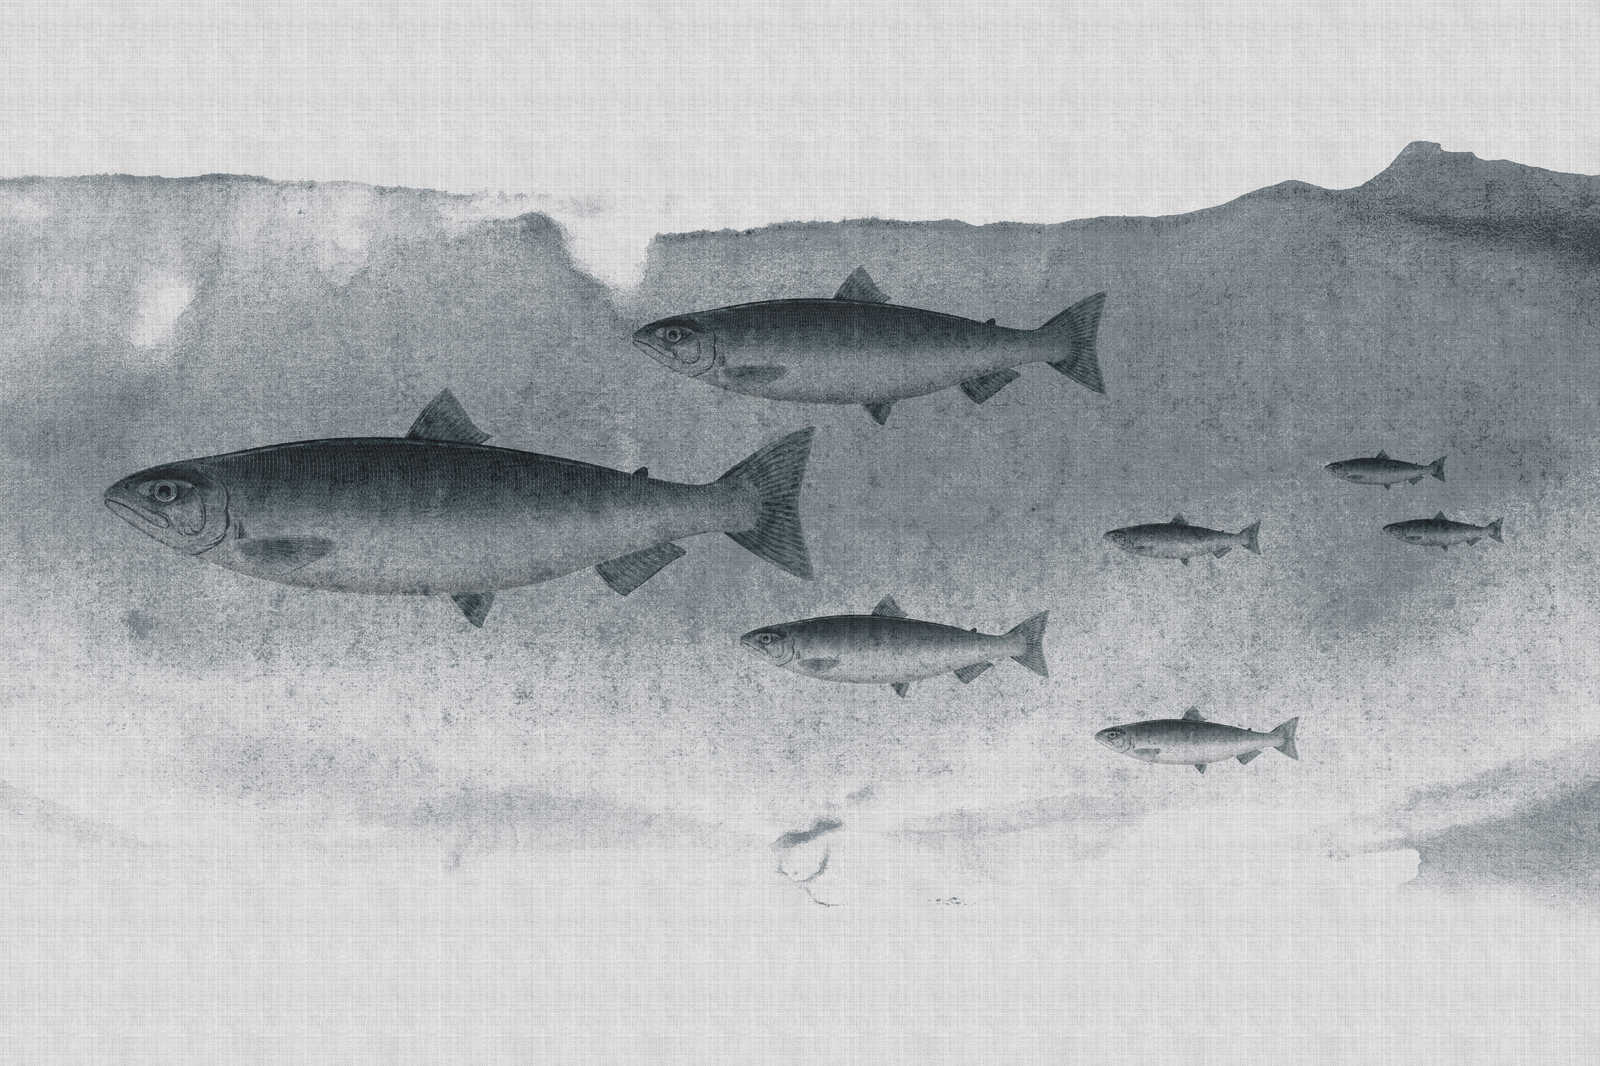             Into the blue 3 - Fish watercolour in grey as canvas picture in natural linen structure - 0.90 m x 0.60 m
        